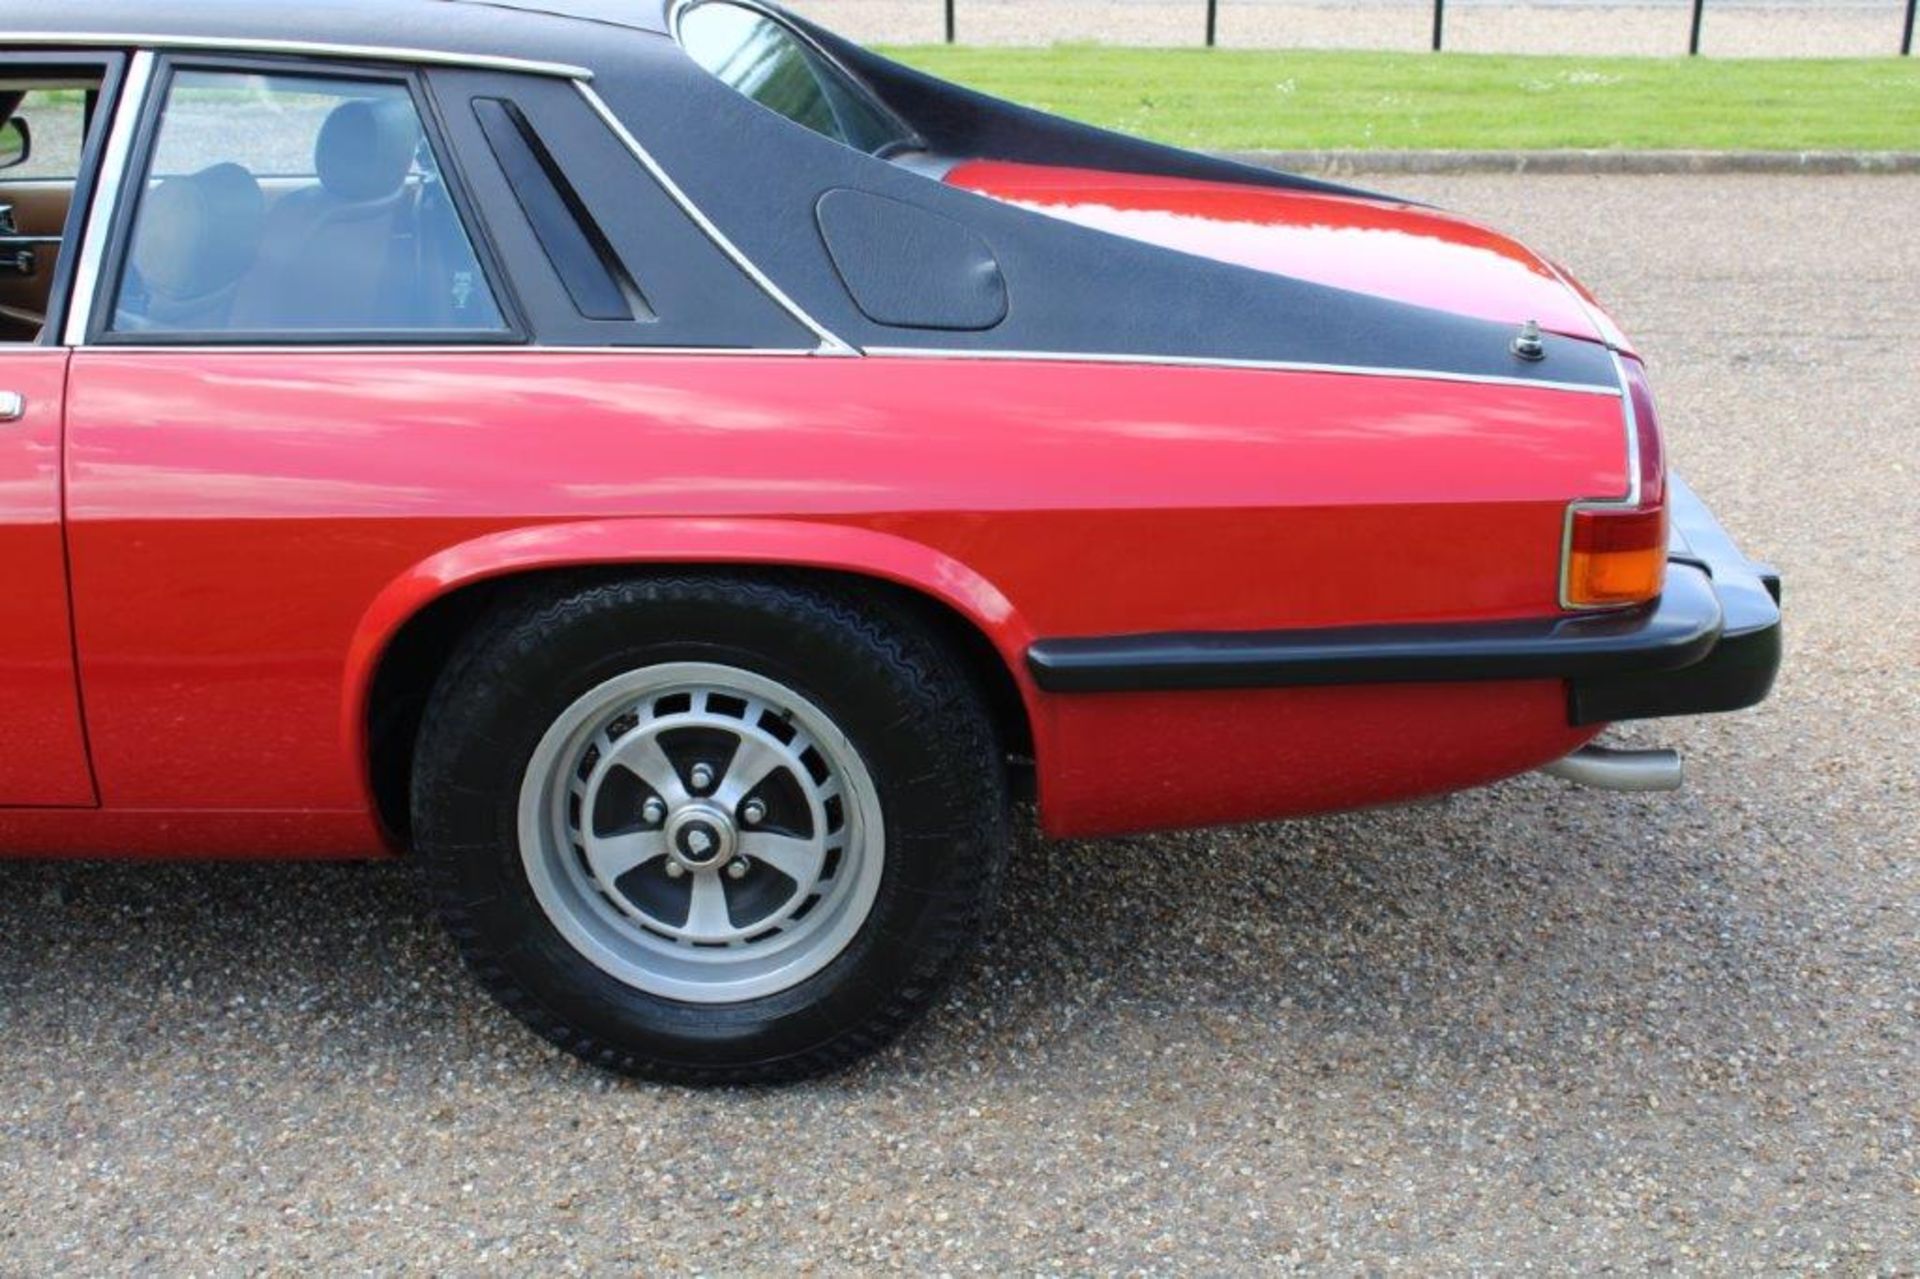 1976 Jaguar XJ-S 5.3 V12 Coupe Auto 29,030 miles from new - Image 9 of 28